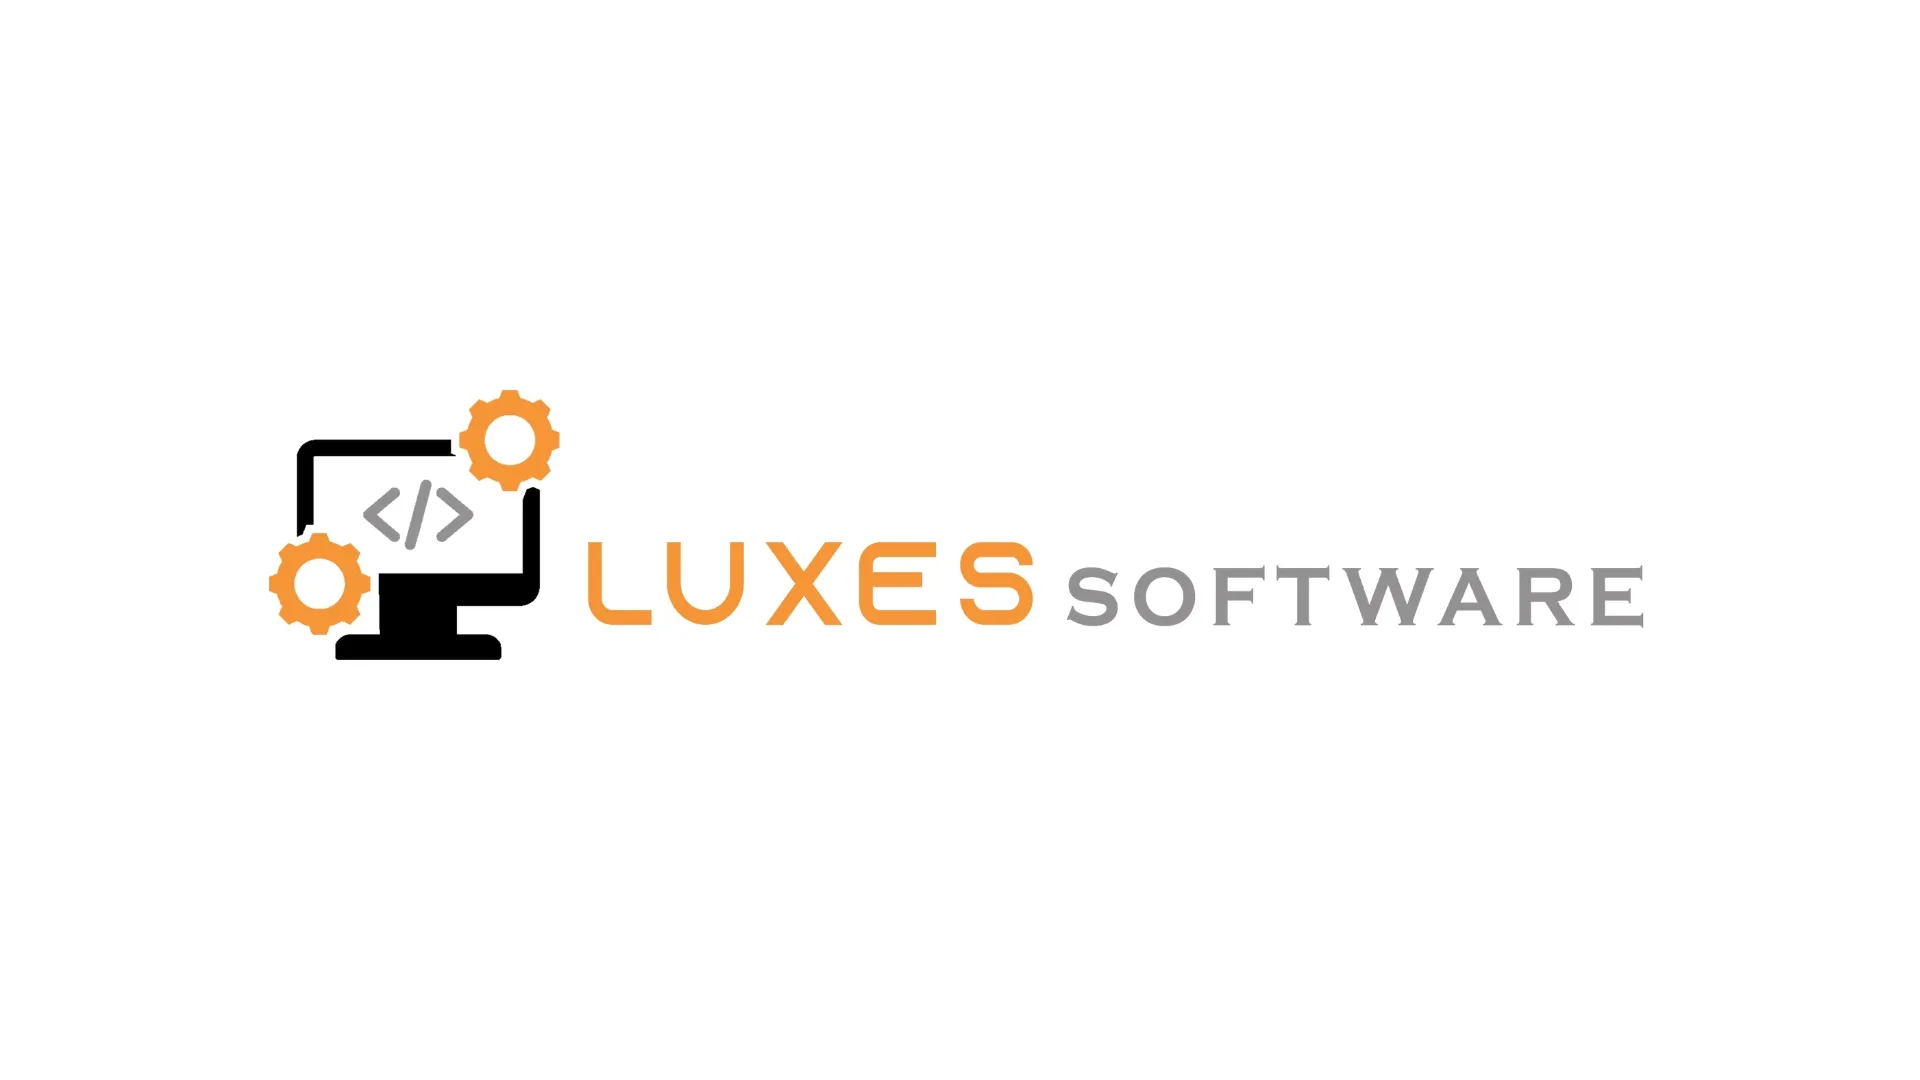 LUXES SOFTWARE